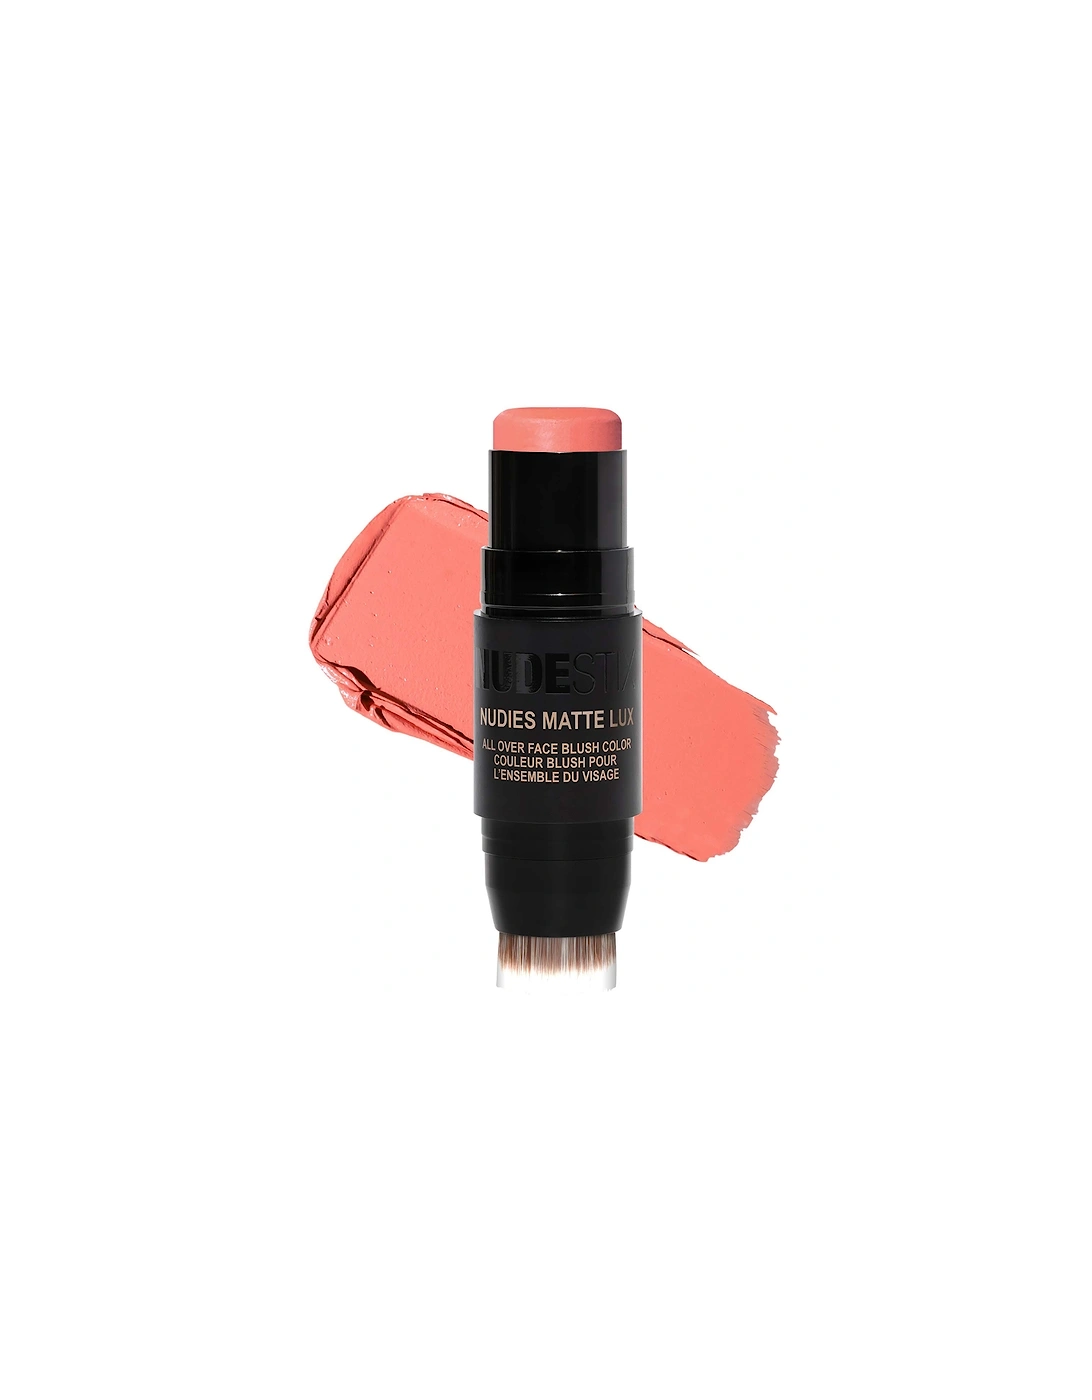 Nudies Matte Lux All Over Face Blush Colour - Pretty Peachy, 2 of 1